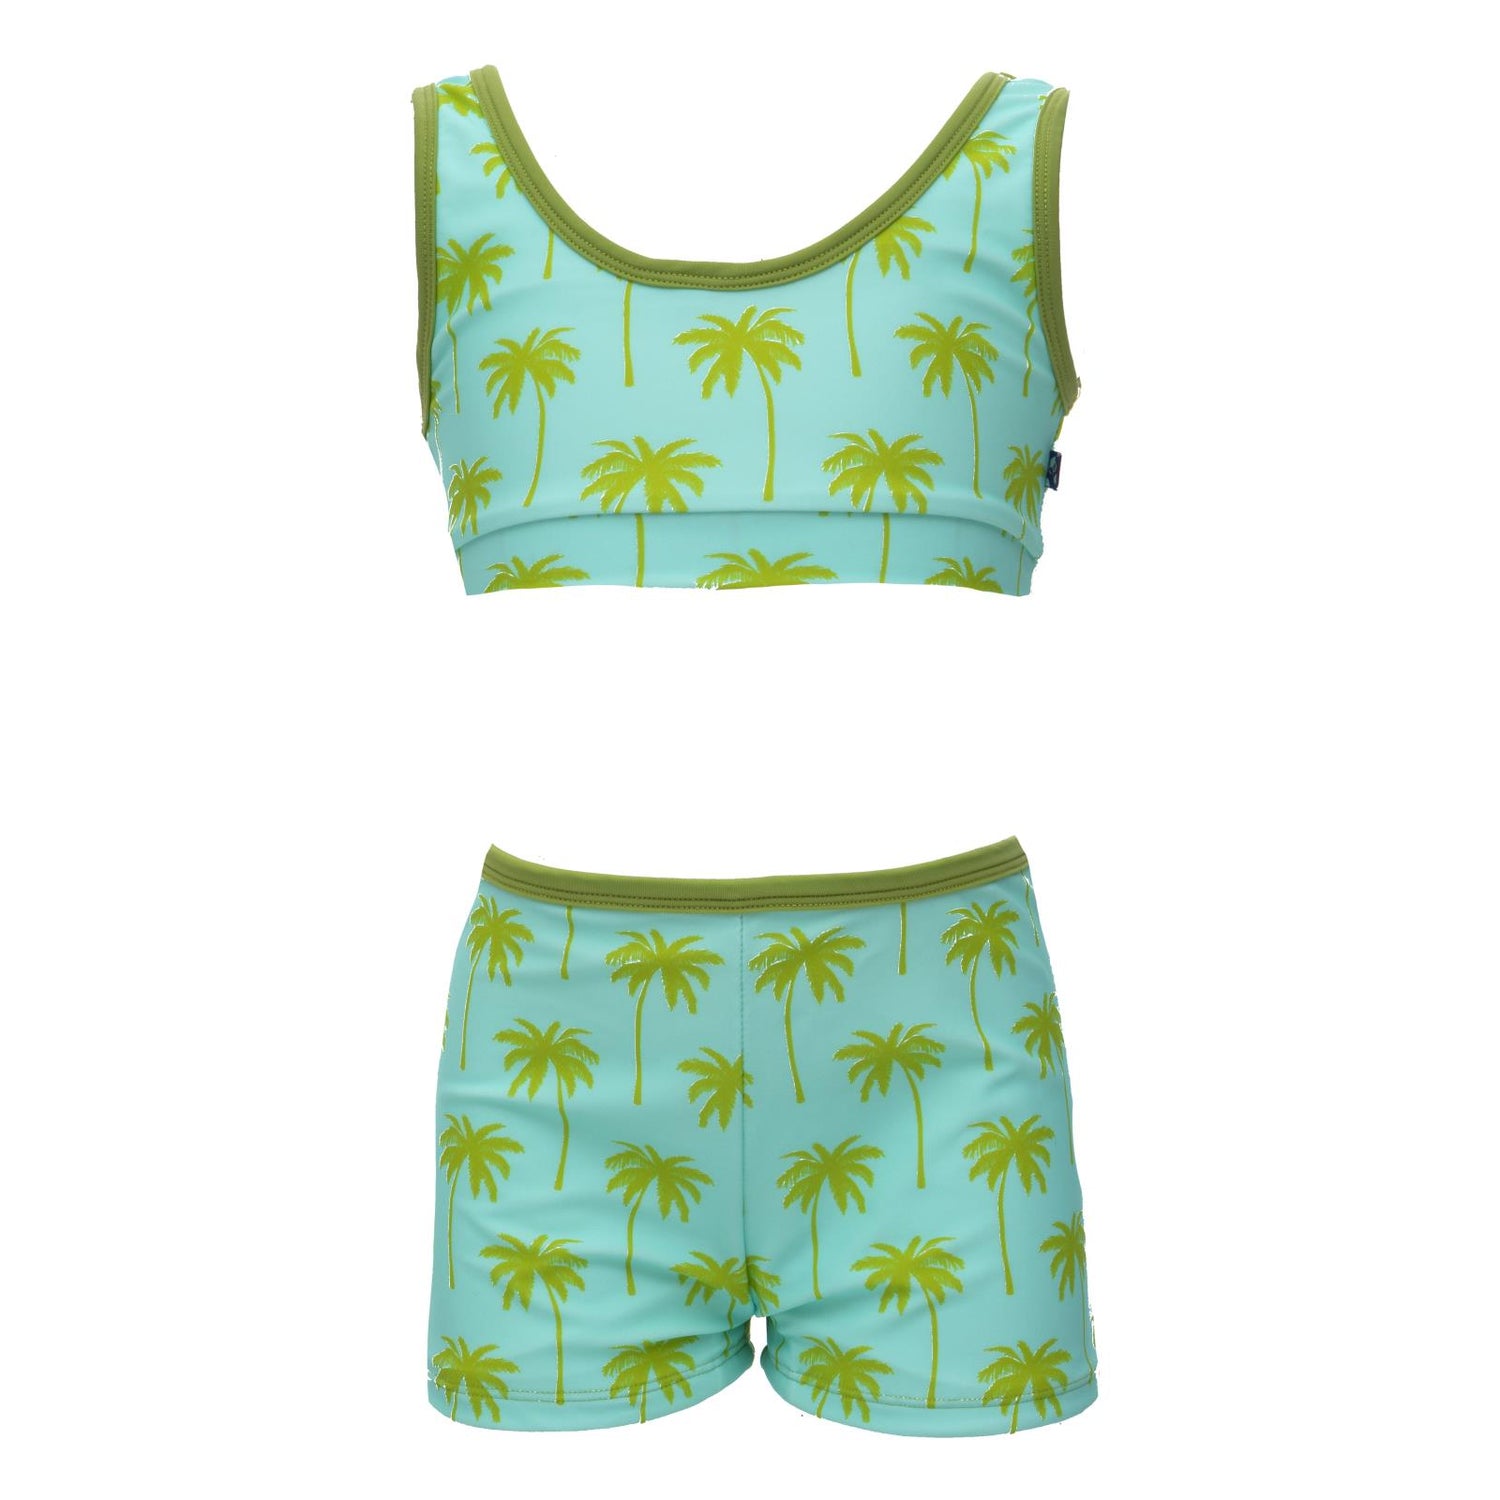 Print 2-Piece Sport Bathing Suit in Summer Sky Palm Trees